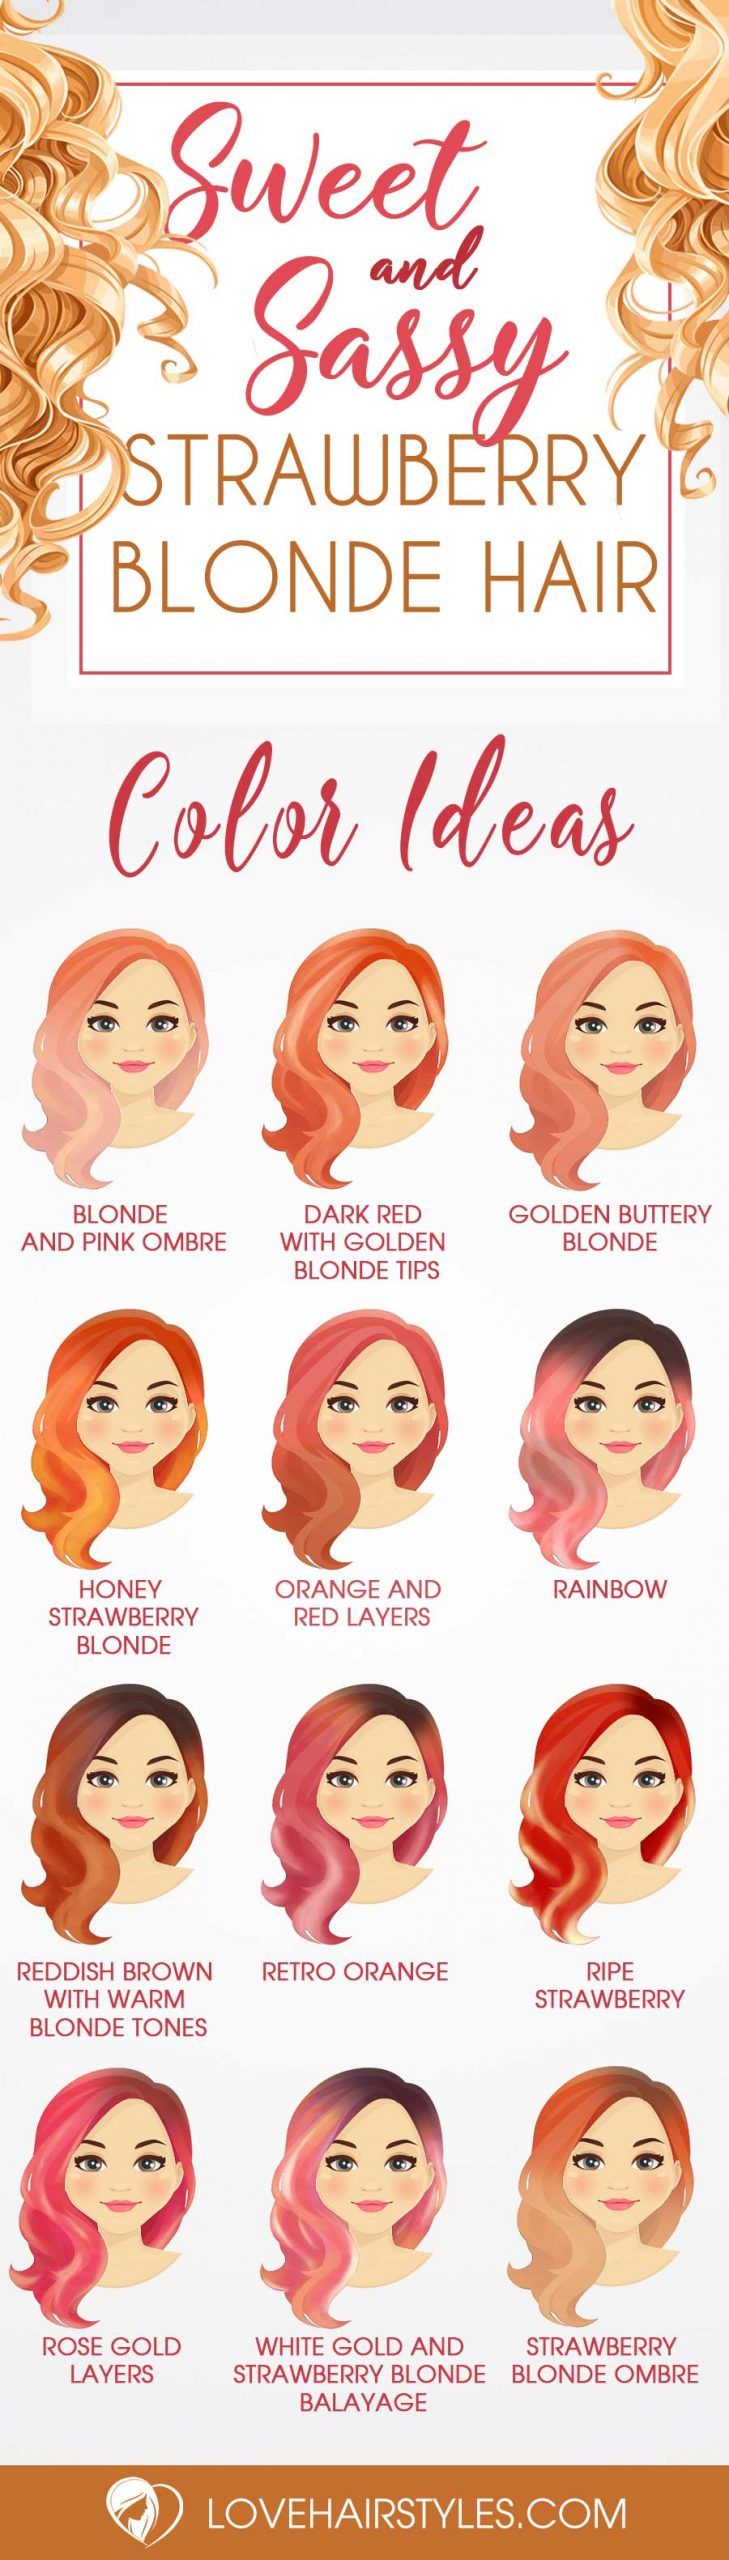 30 Stunning Strawberry Blonde Hair Ideas to Make You Stand Out in 2023